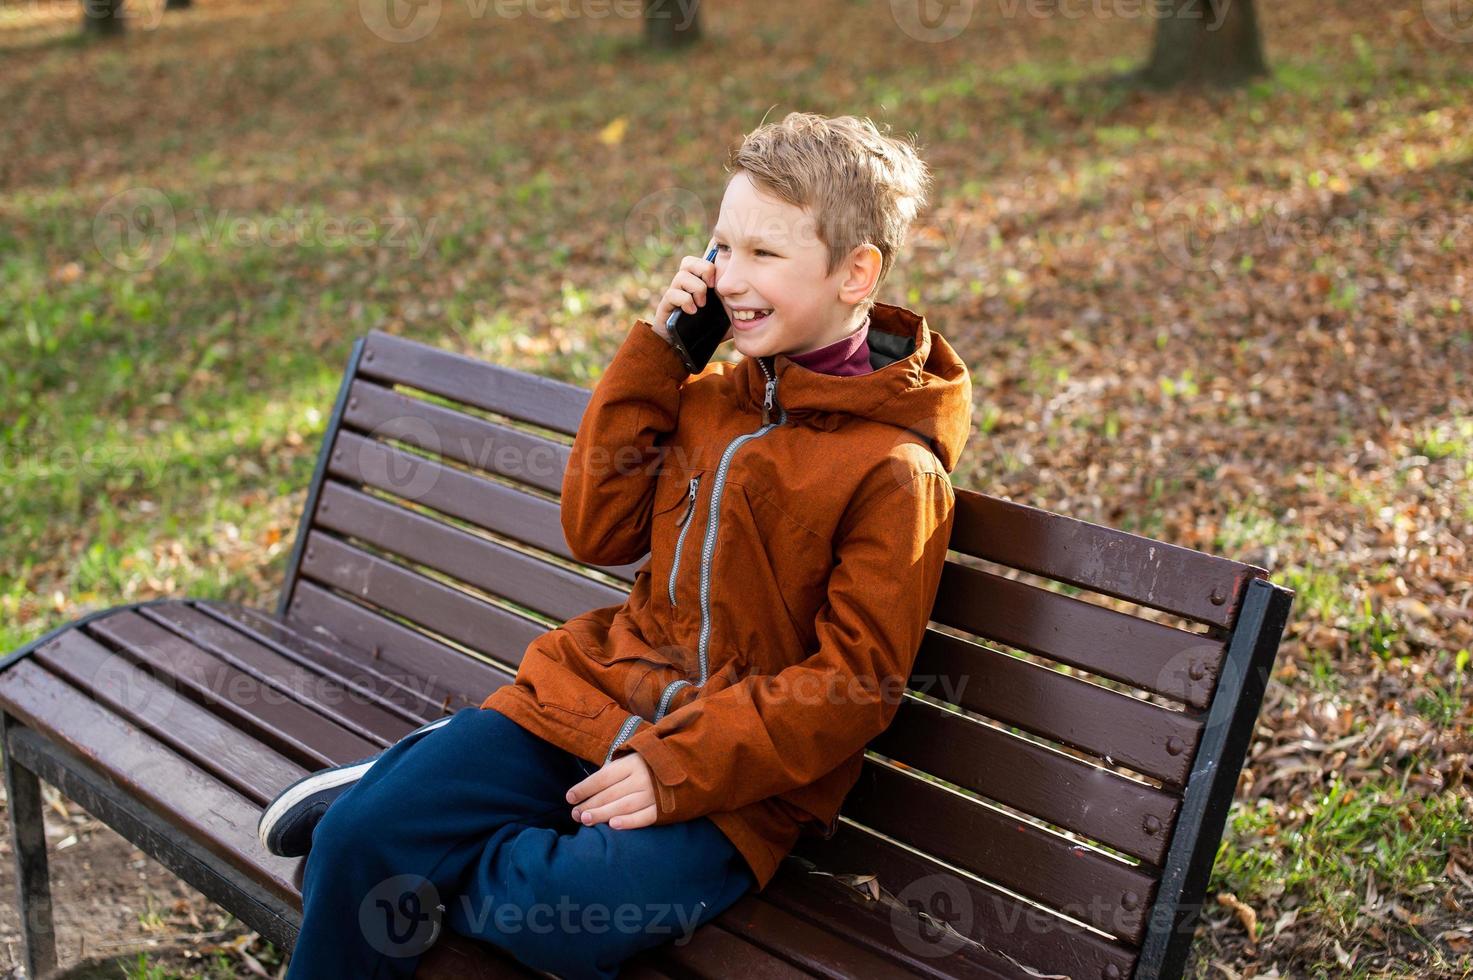 A boy is talking on the phone and laughing while sitting on a park bench in autumn photo